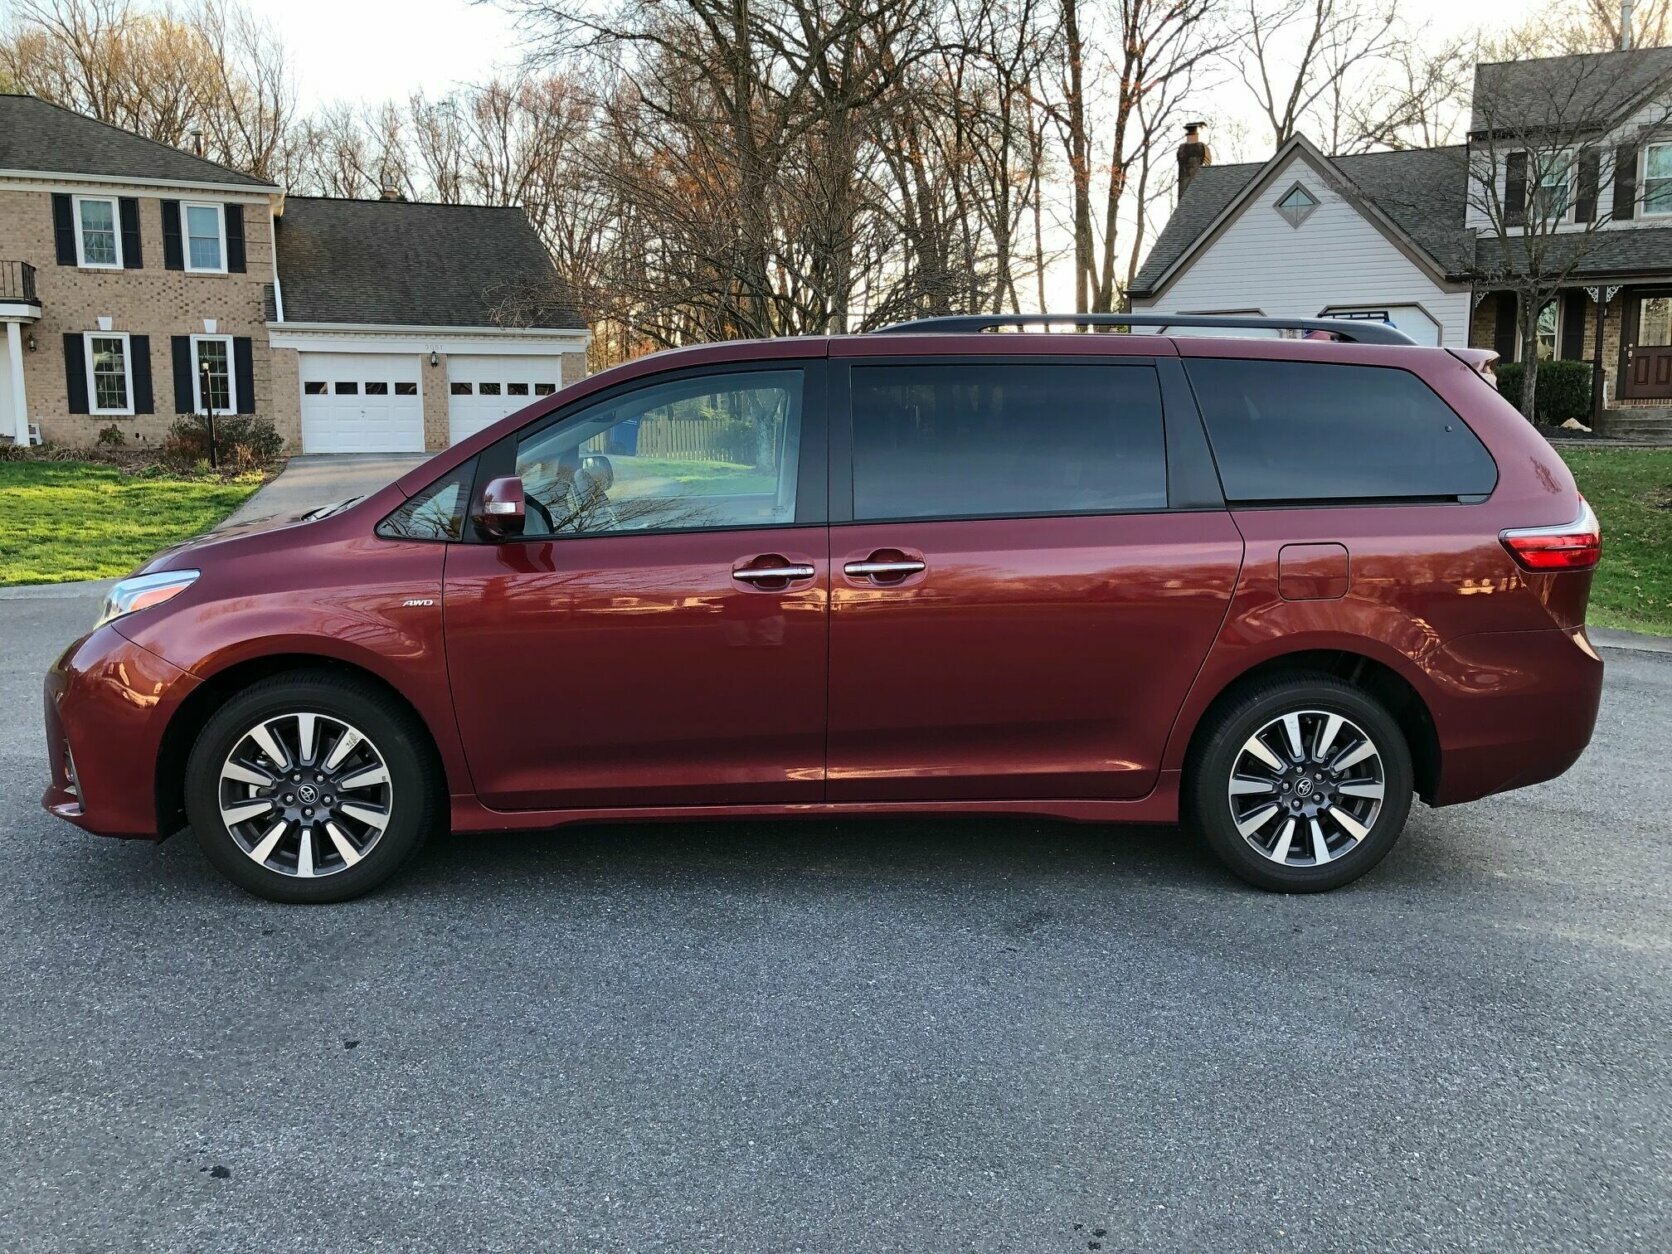 <p>Minivans in general offer much greater ease of use than SUVs, thanks to their large sliding doors and big rear hatches.</p>
<p>When it comes to loading everyone and everything up – and especially making the climb into the third row of seats less awkward – vans are hard to beat.</p>
<p>The Sienna starts at $32,760 for front-wheel drive models, including a delivery, processing and handling fee.</p>
